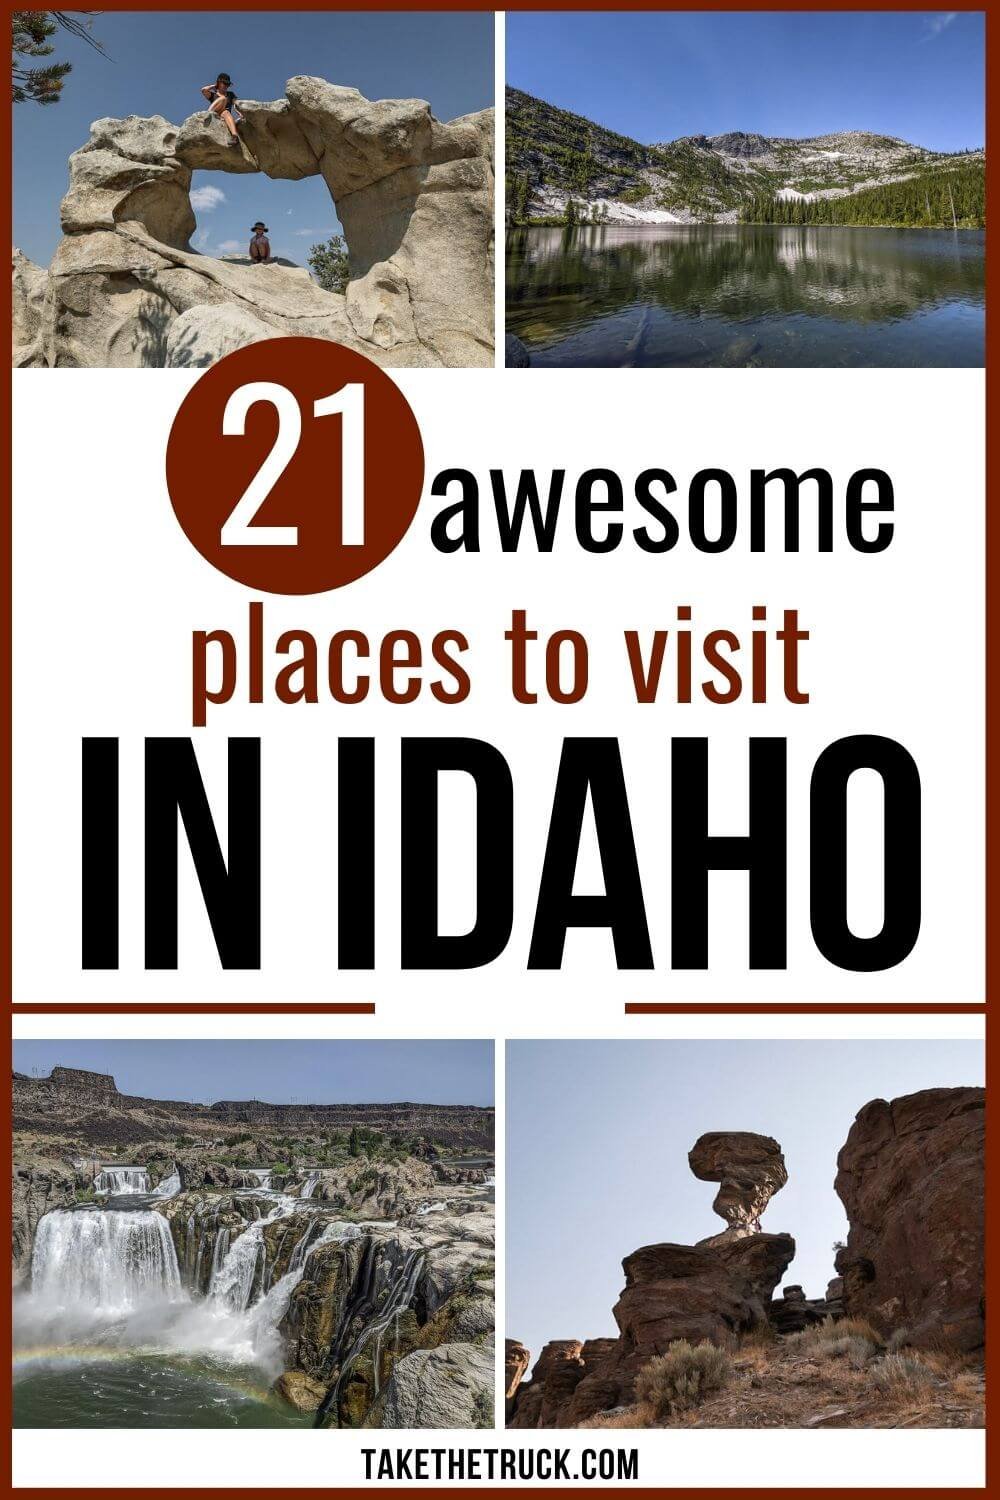 Planning some Idaho travel or an Idaho road trip? This post can help you find the top things to see in Idaho and the best things to do in Idaho - both southern Idaho and northern Idaho.